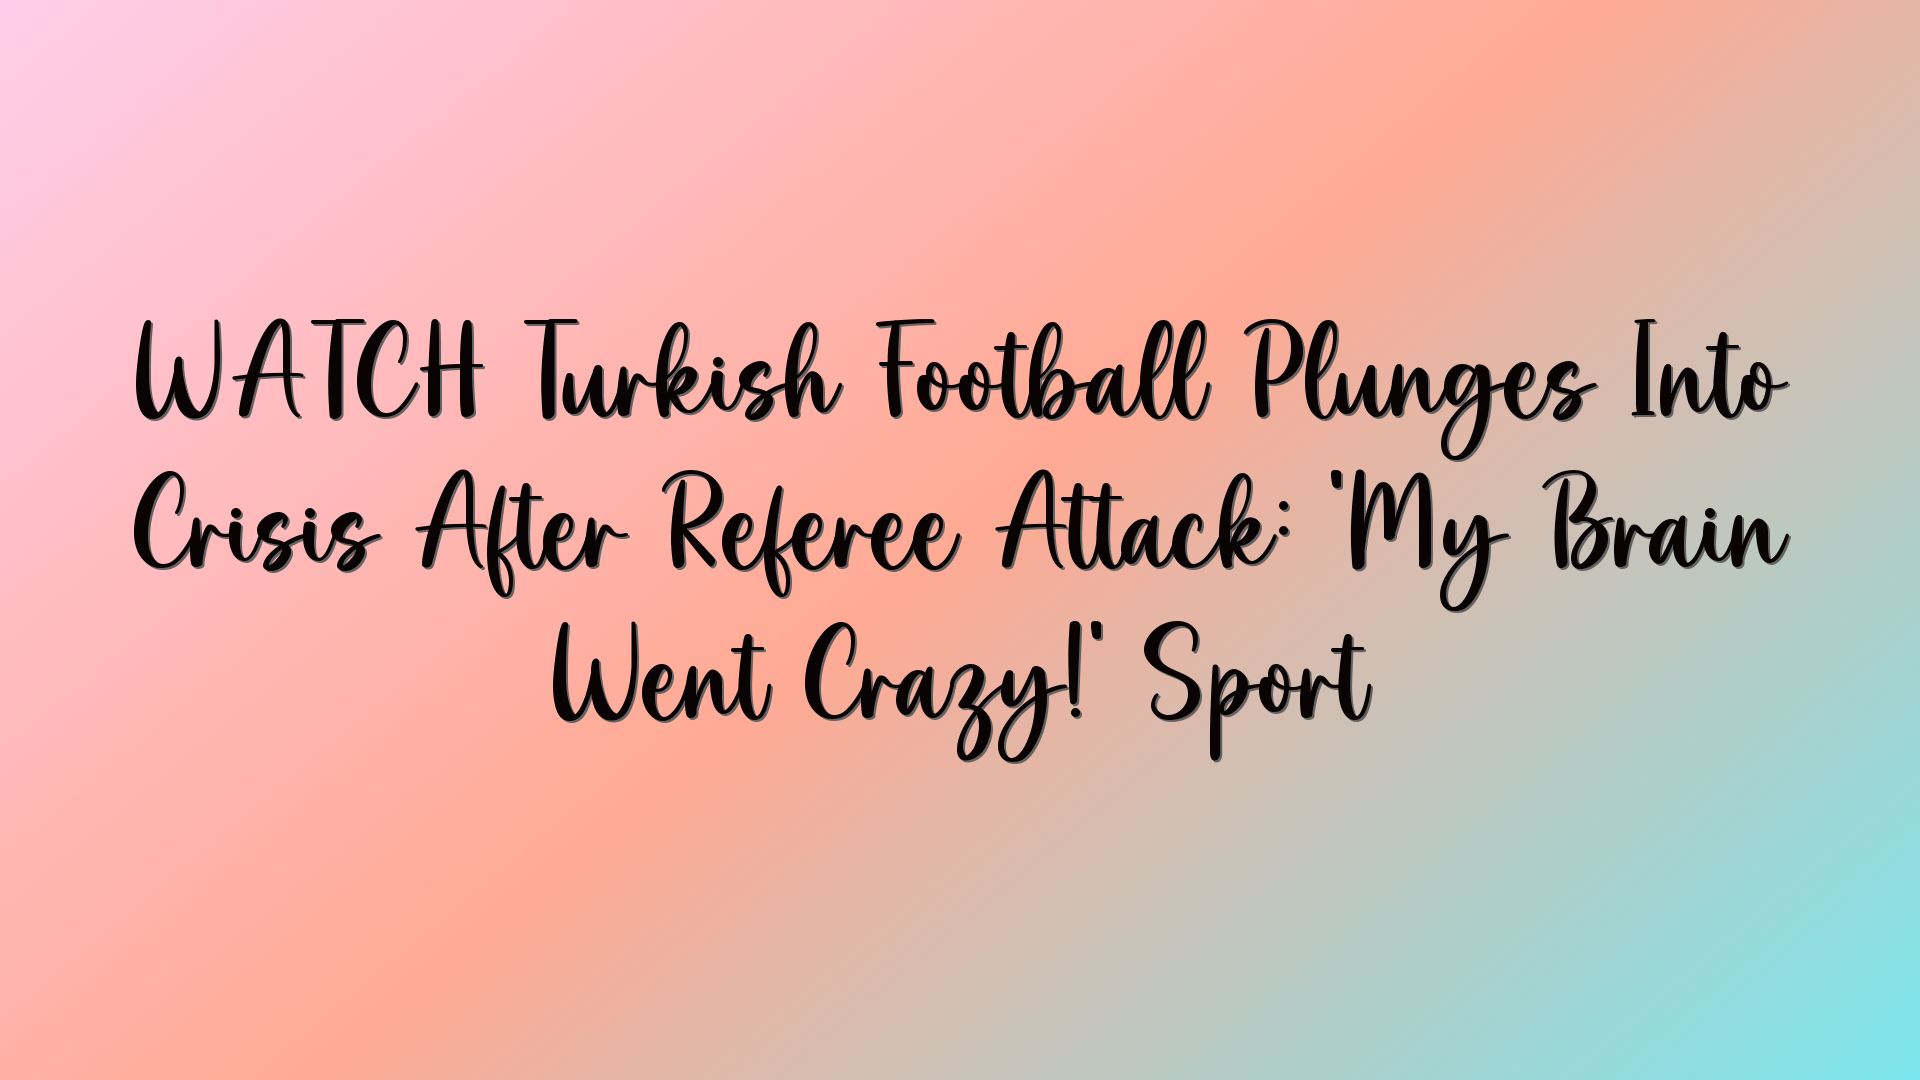 WATCH Turkish Football Plunges Into Crisis After Referee Attack: ‘My Brain Went Crazy!’ Sport